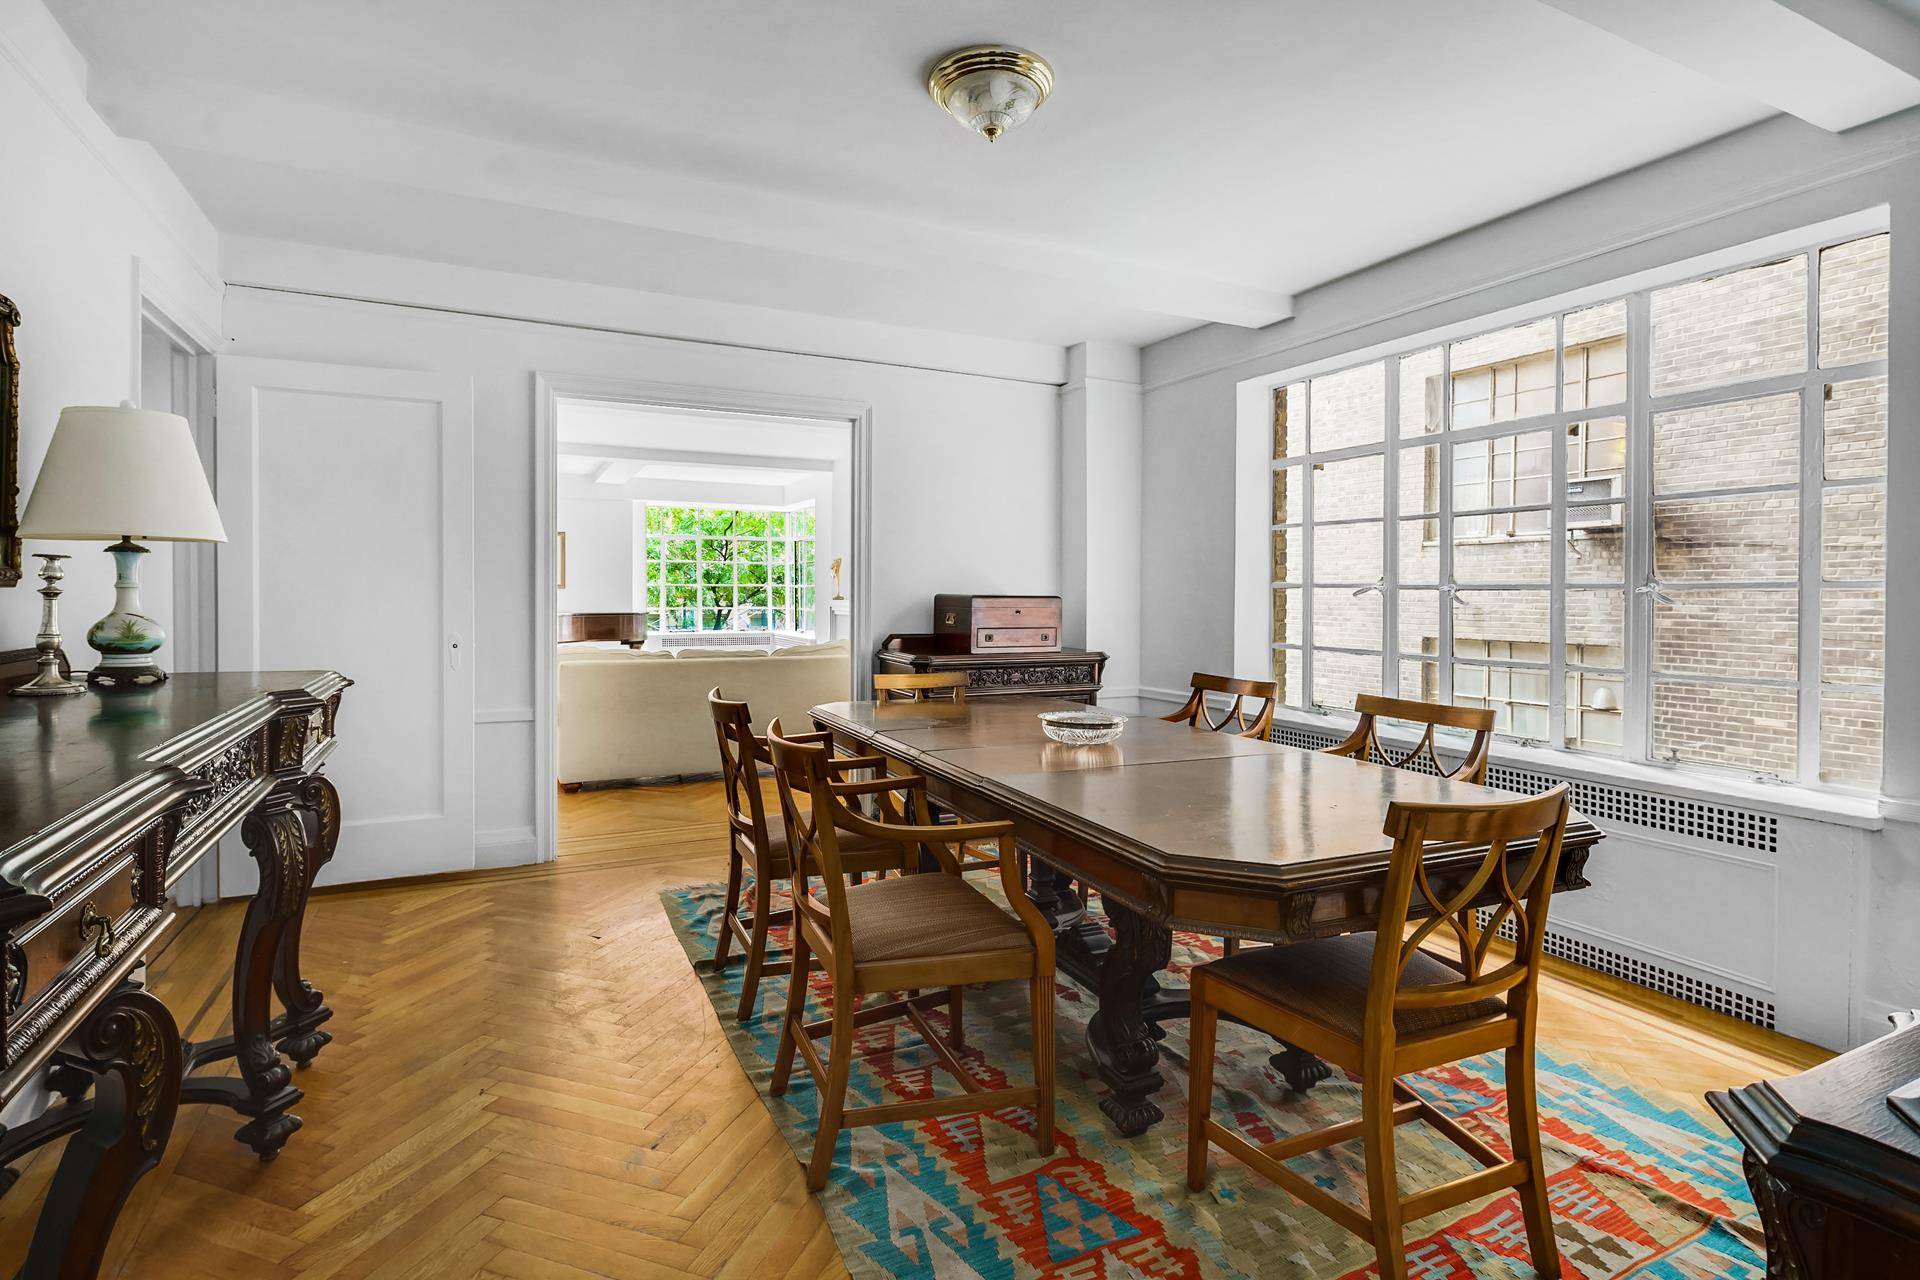 Unique opportunity to combine two large side by side units 4G and 4H at the Ardsley, 320 CENTRAL PARK WEST.